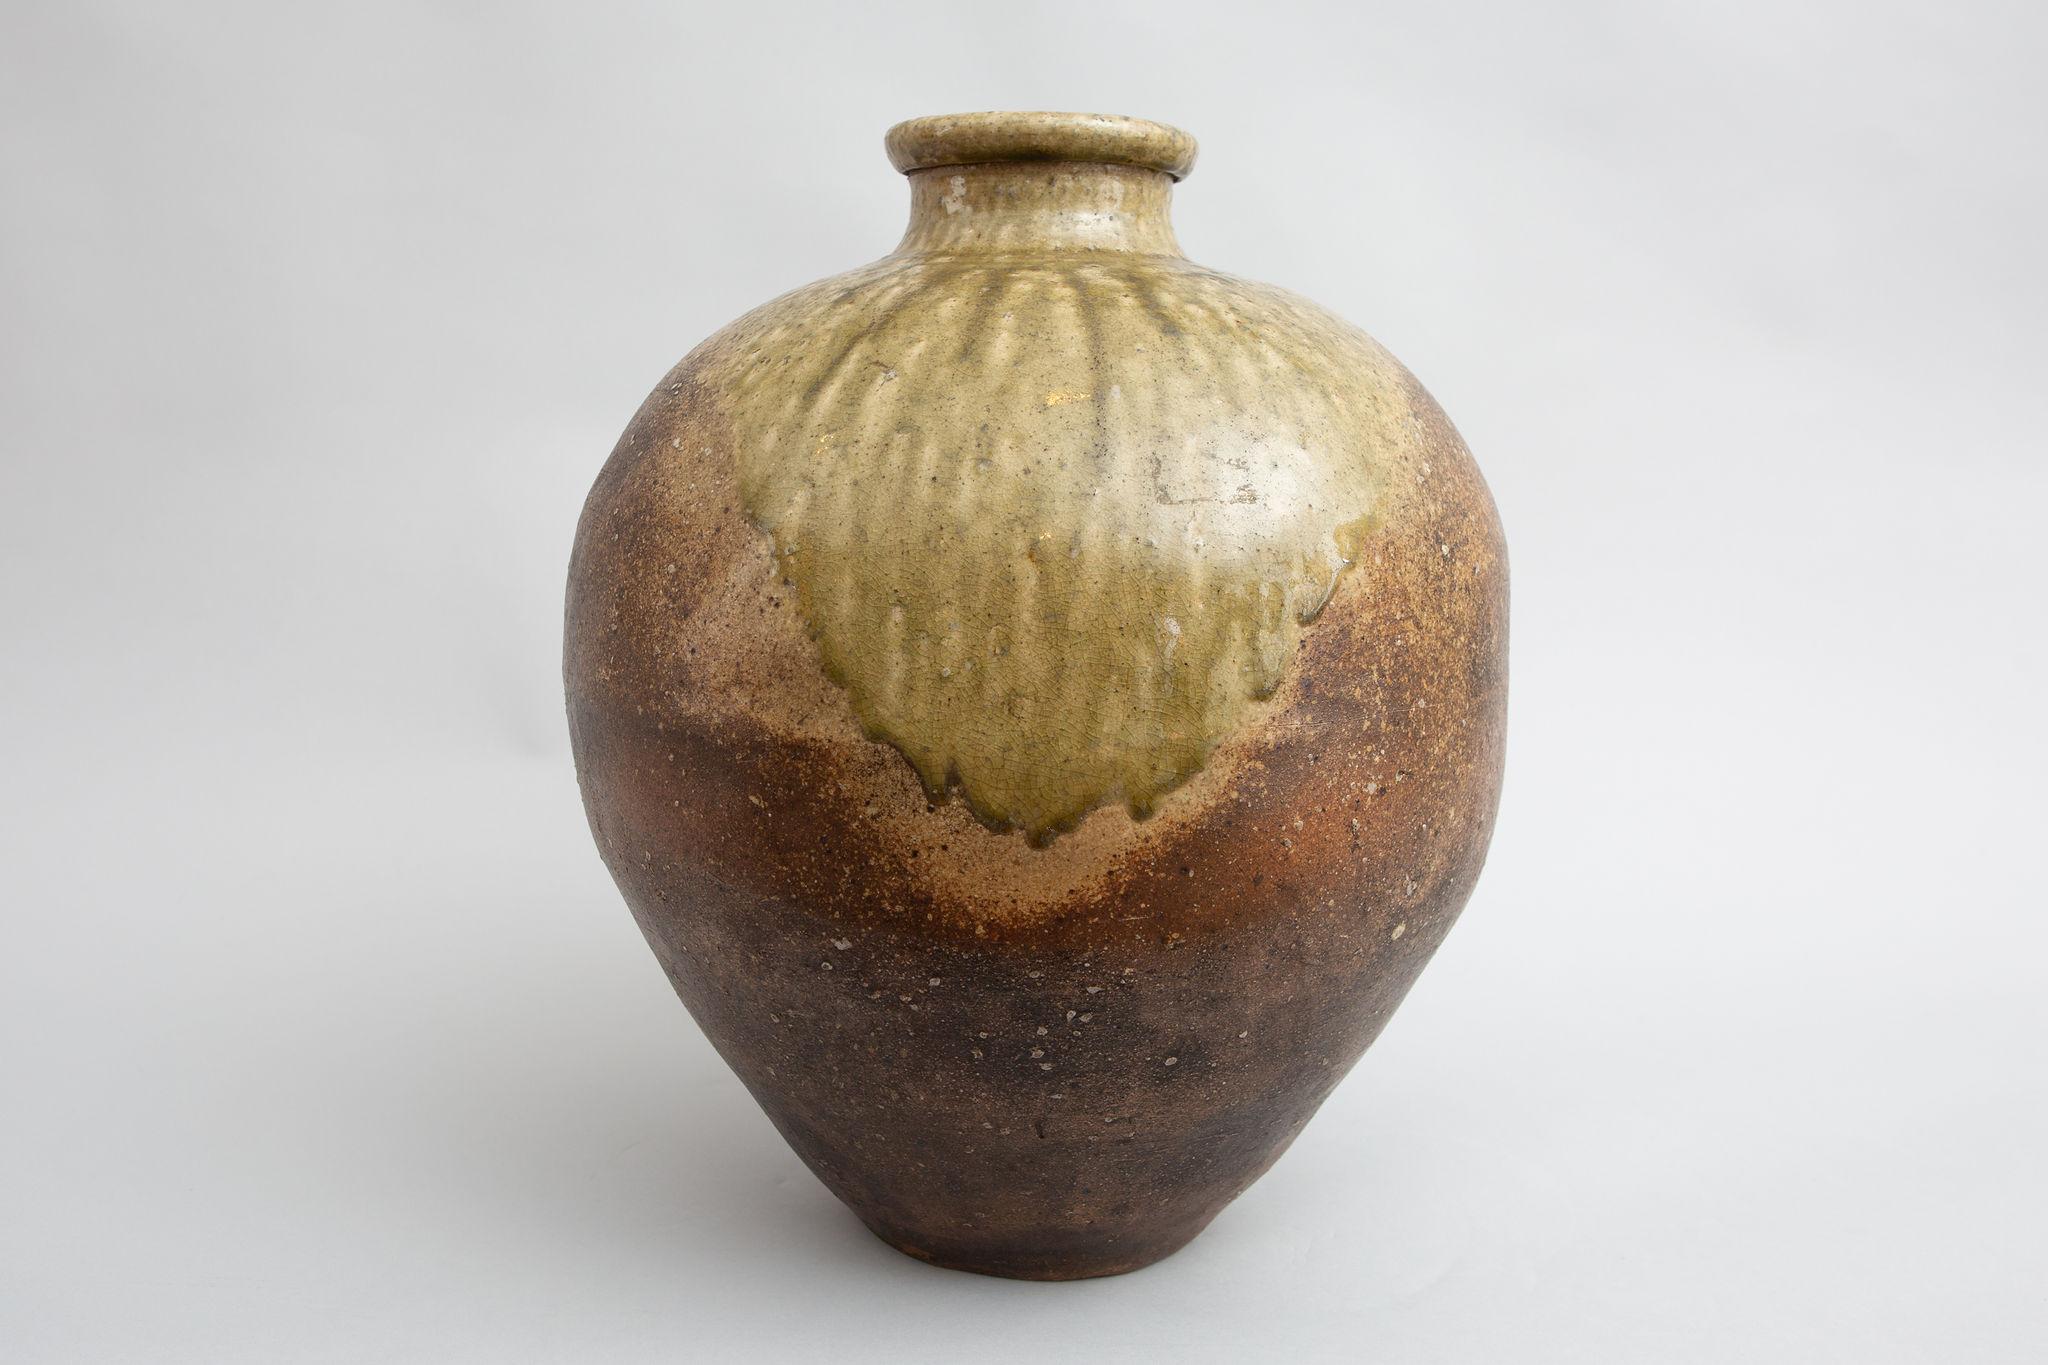 Shigaraki is one of the six ancient kilns of Japan. Early 17th century full formed vessel with refined neck and green glaze on front shoulder. Very similar to two pieces in 